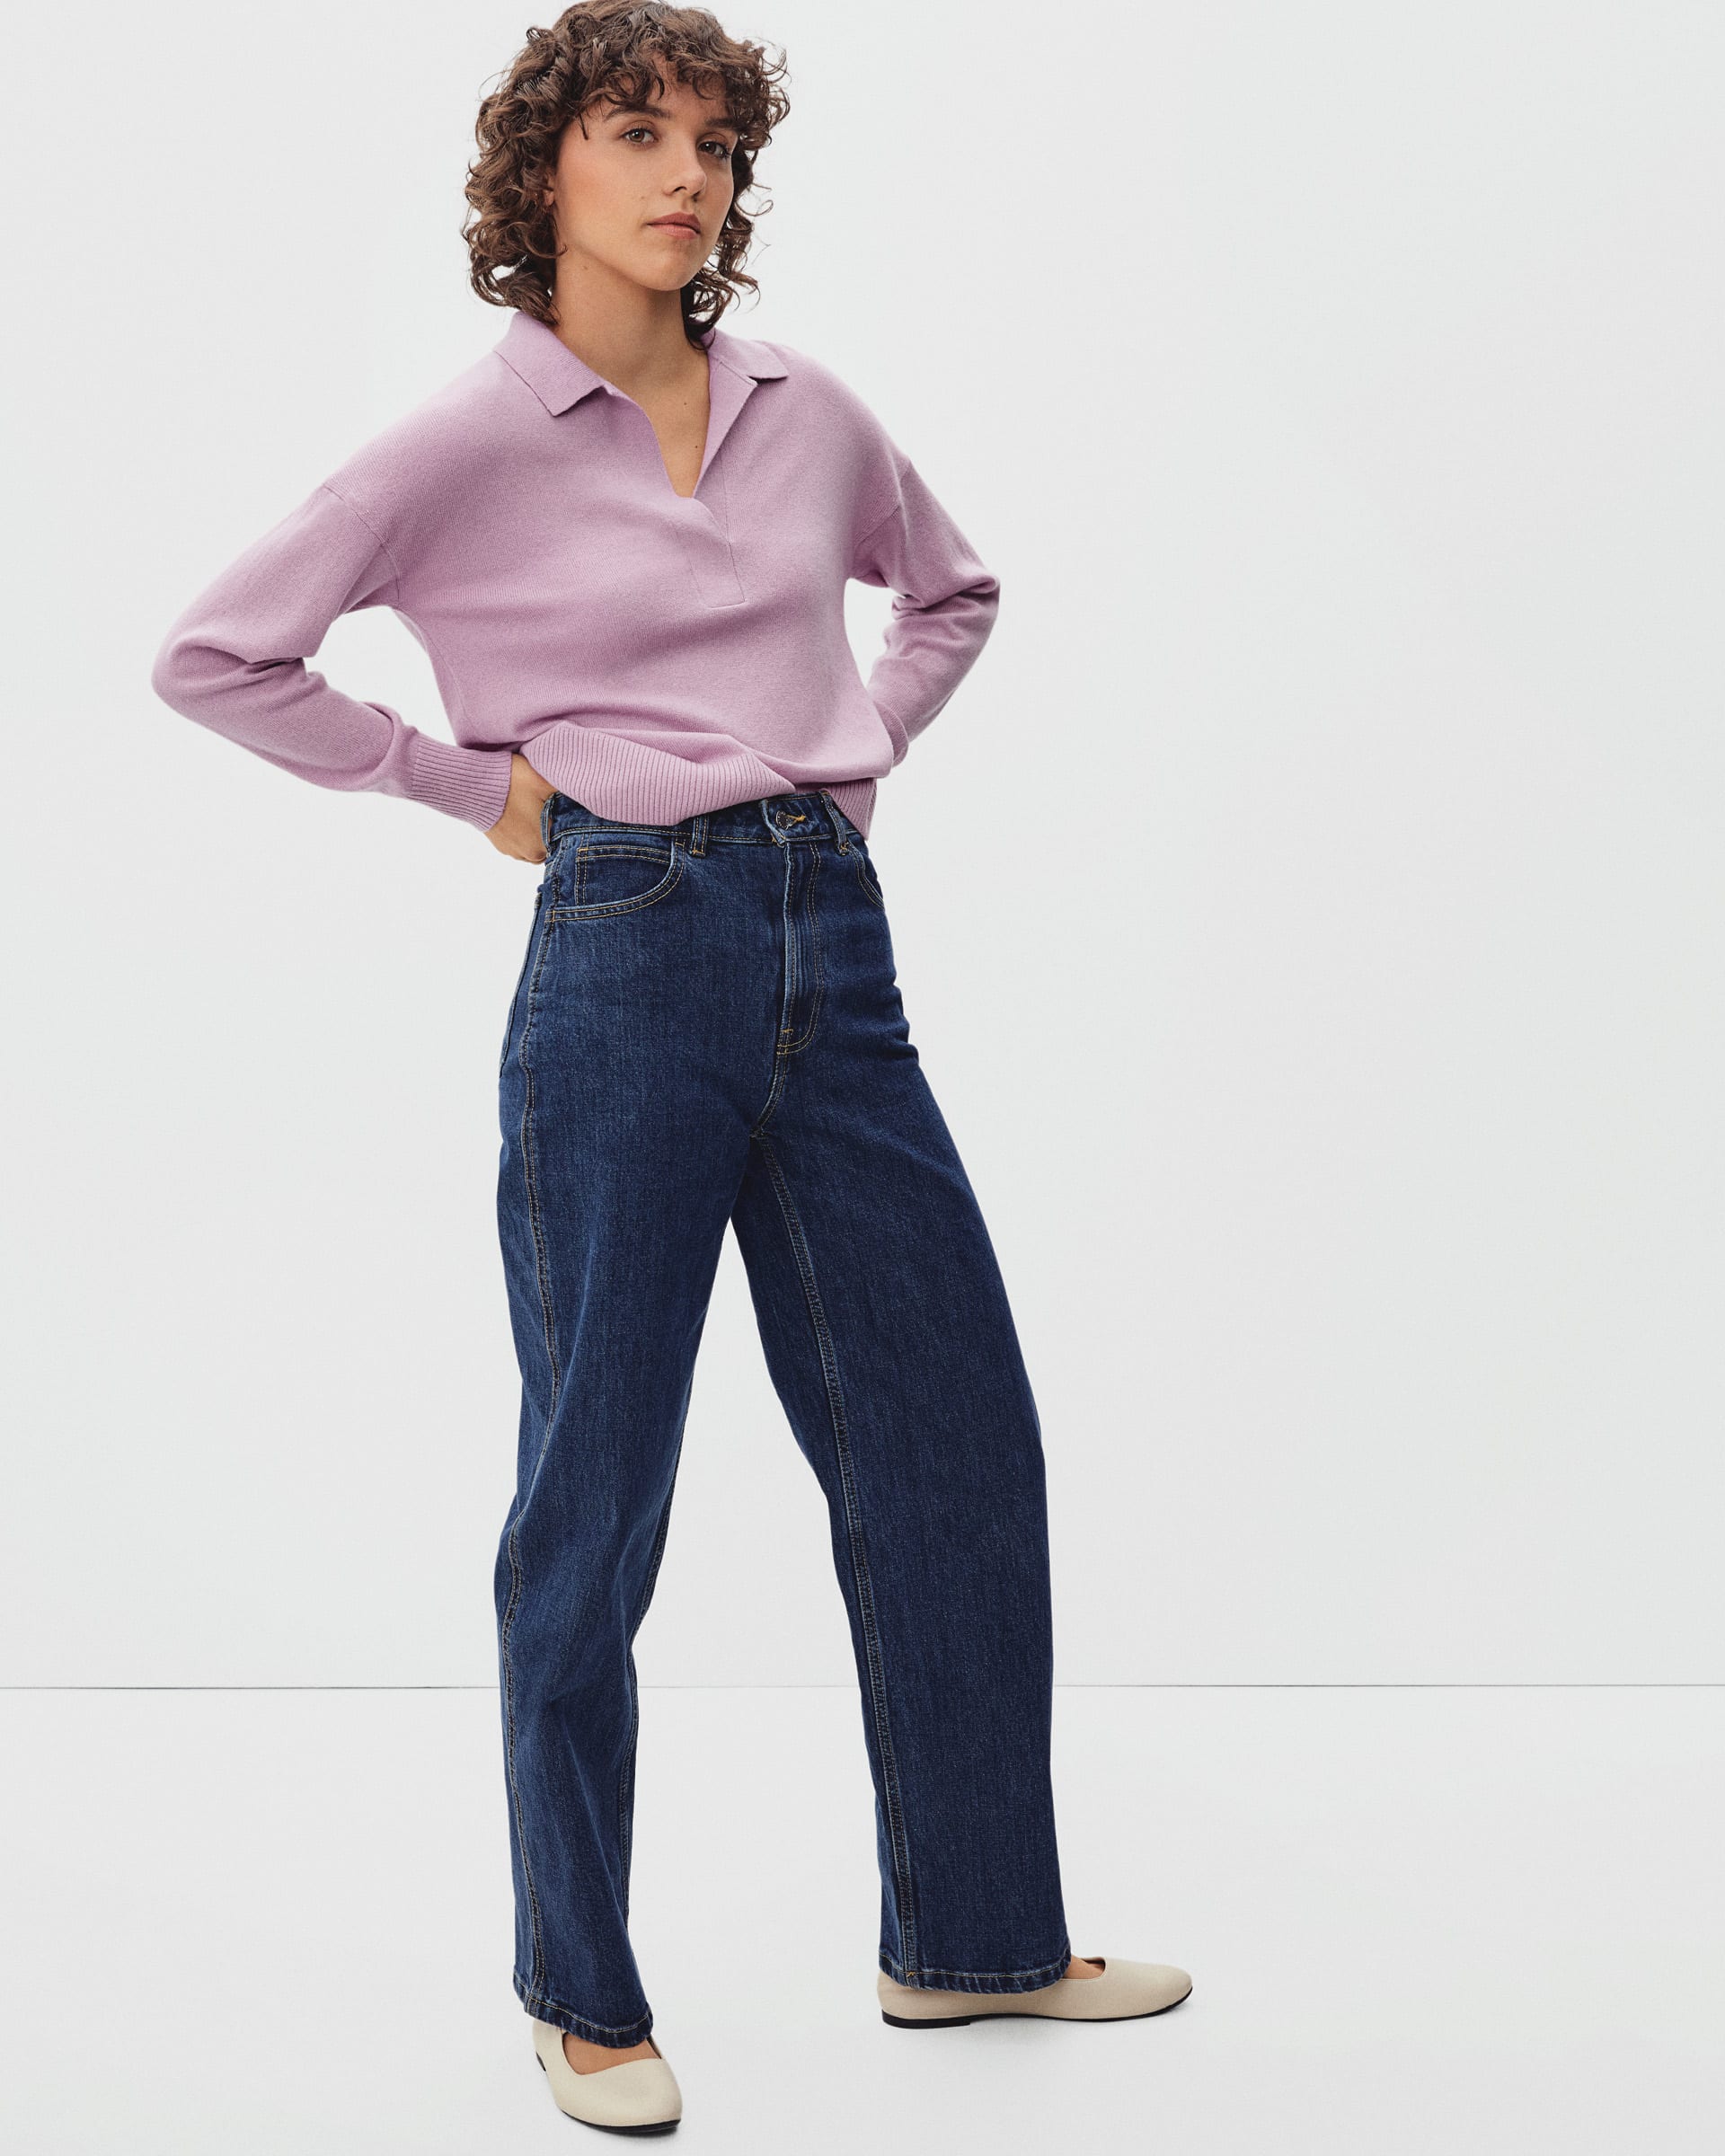 The Cashmere Polo Lily – Everlane